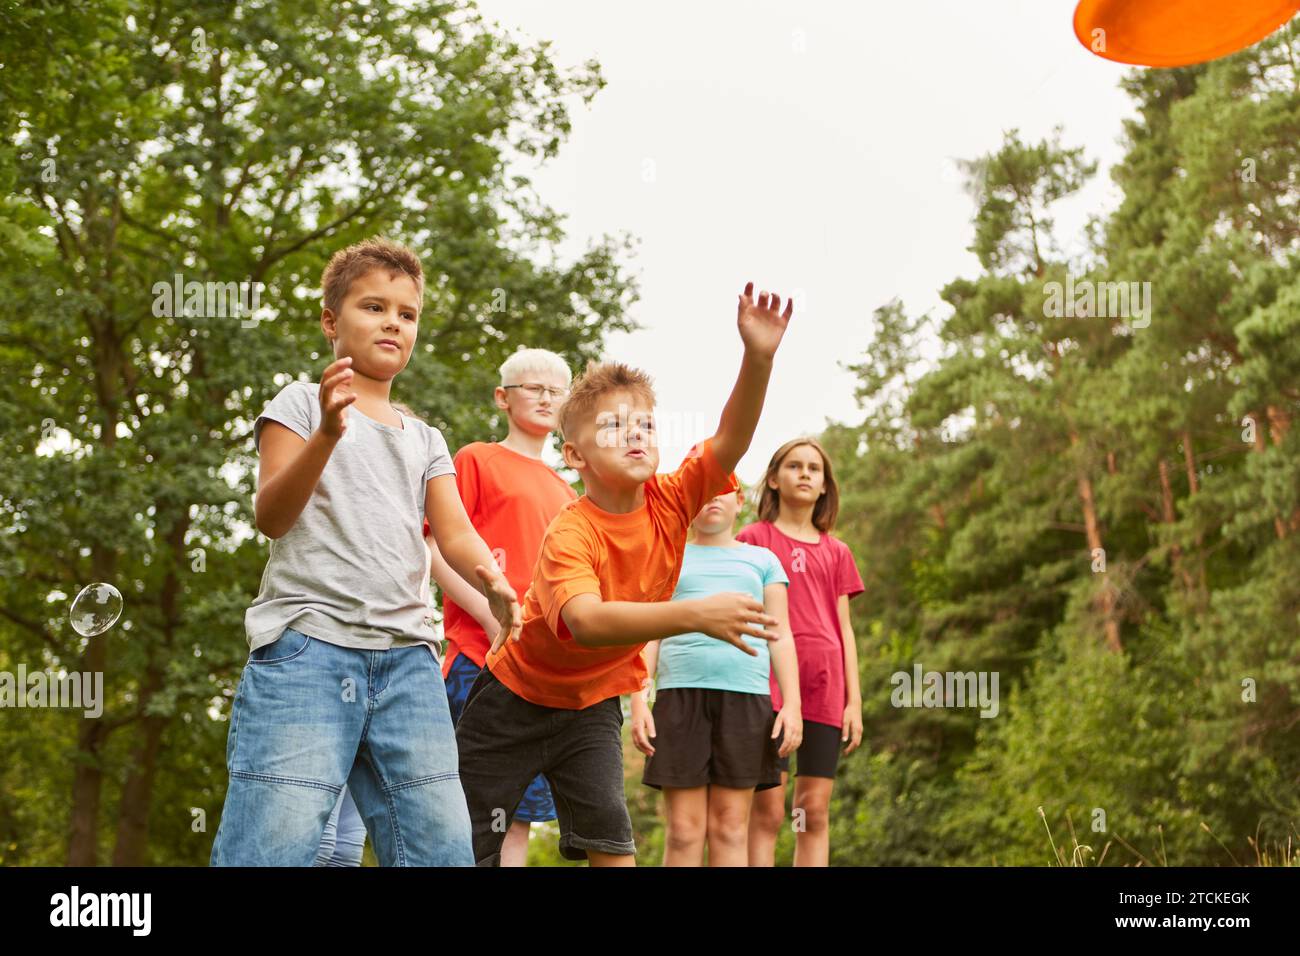 Playful boy throwing frisbee while playing with friends at park Stock Photo